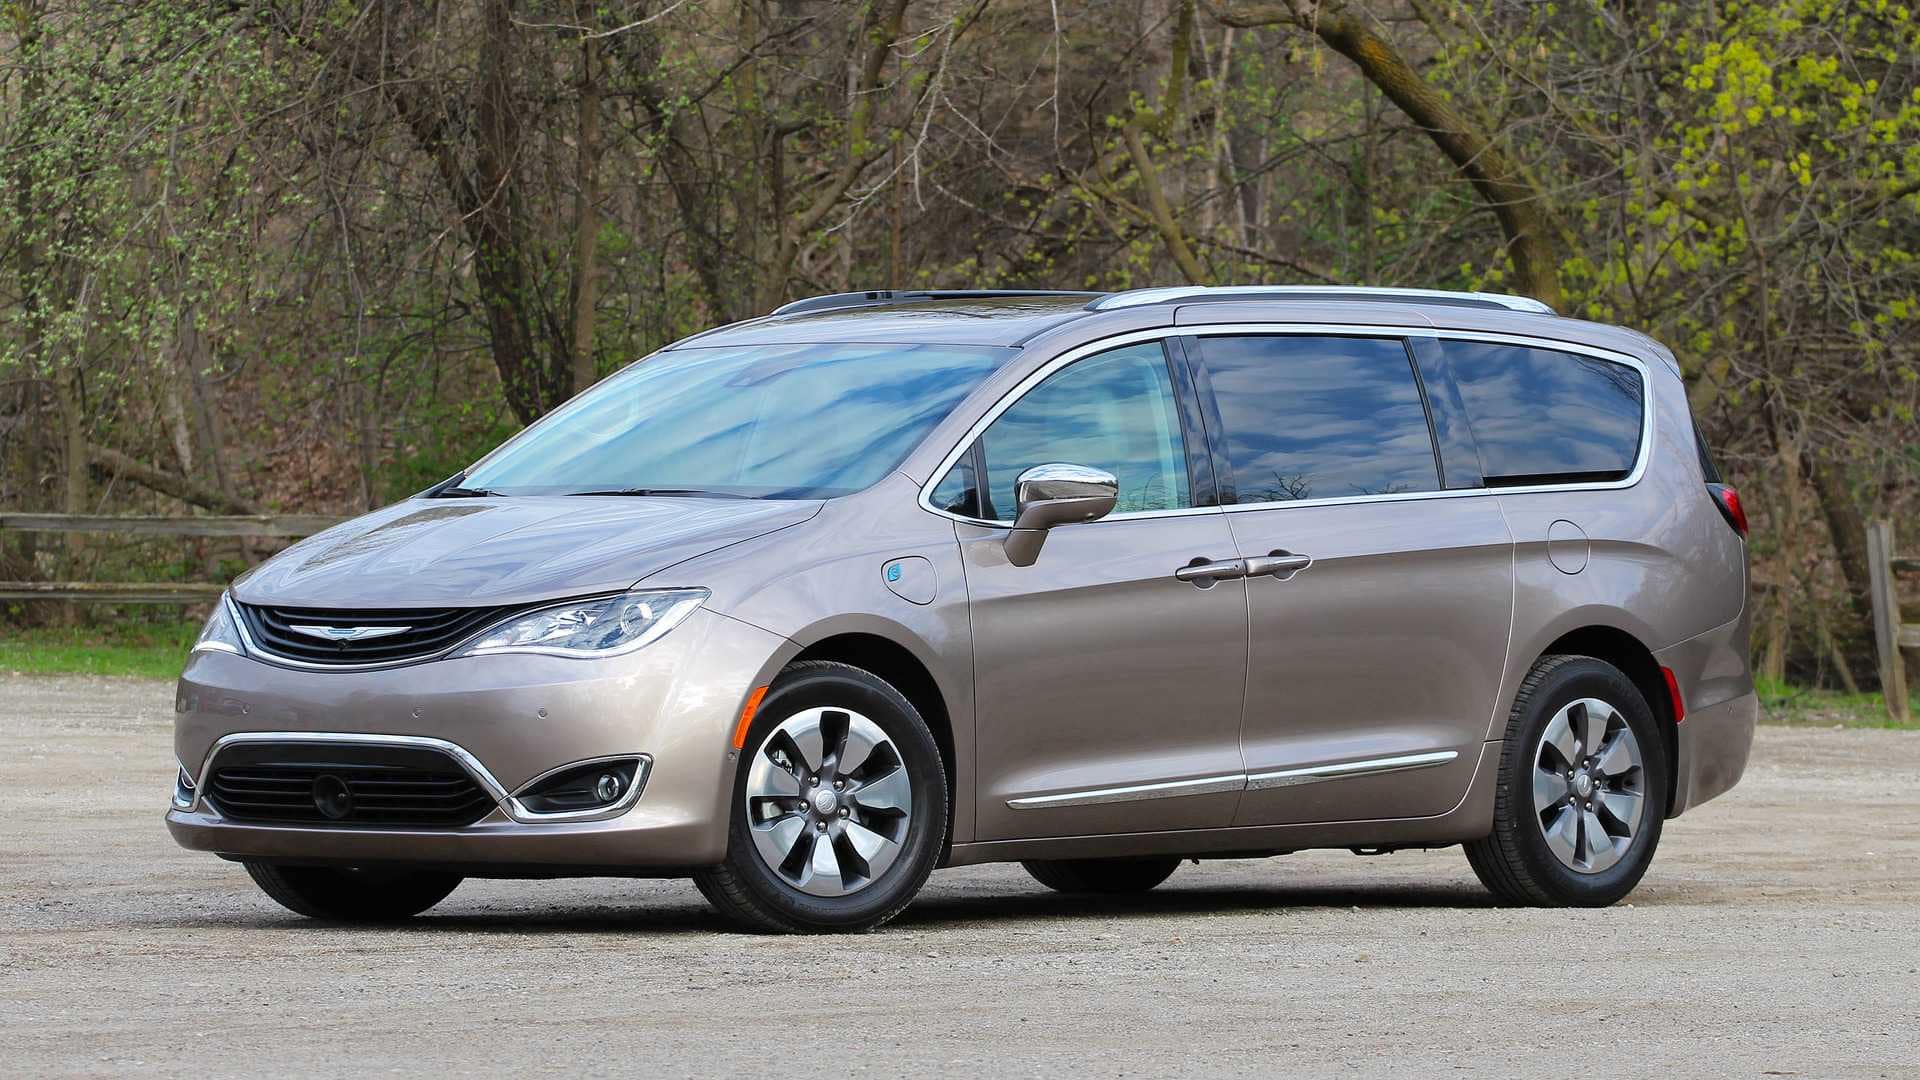 PARENTS Magazine Named the 2020 Chrysler Pacifica Hybrid the “Best Eco Pick”